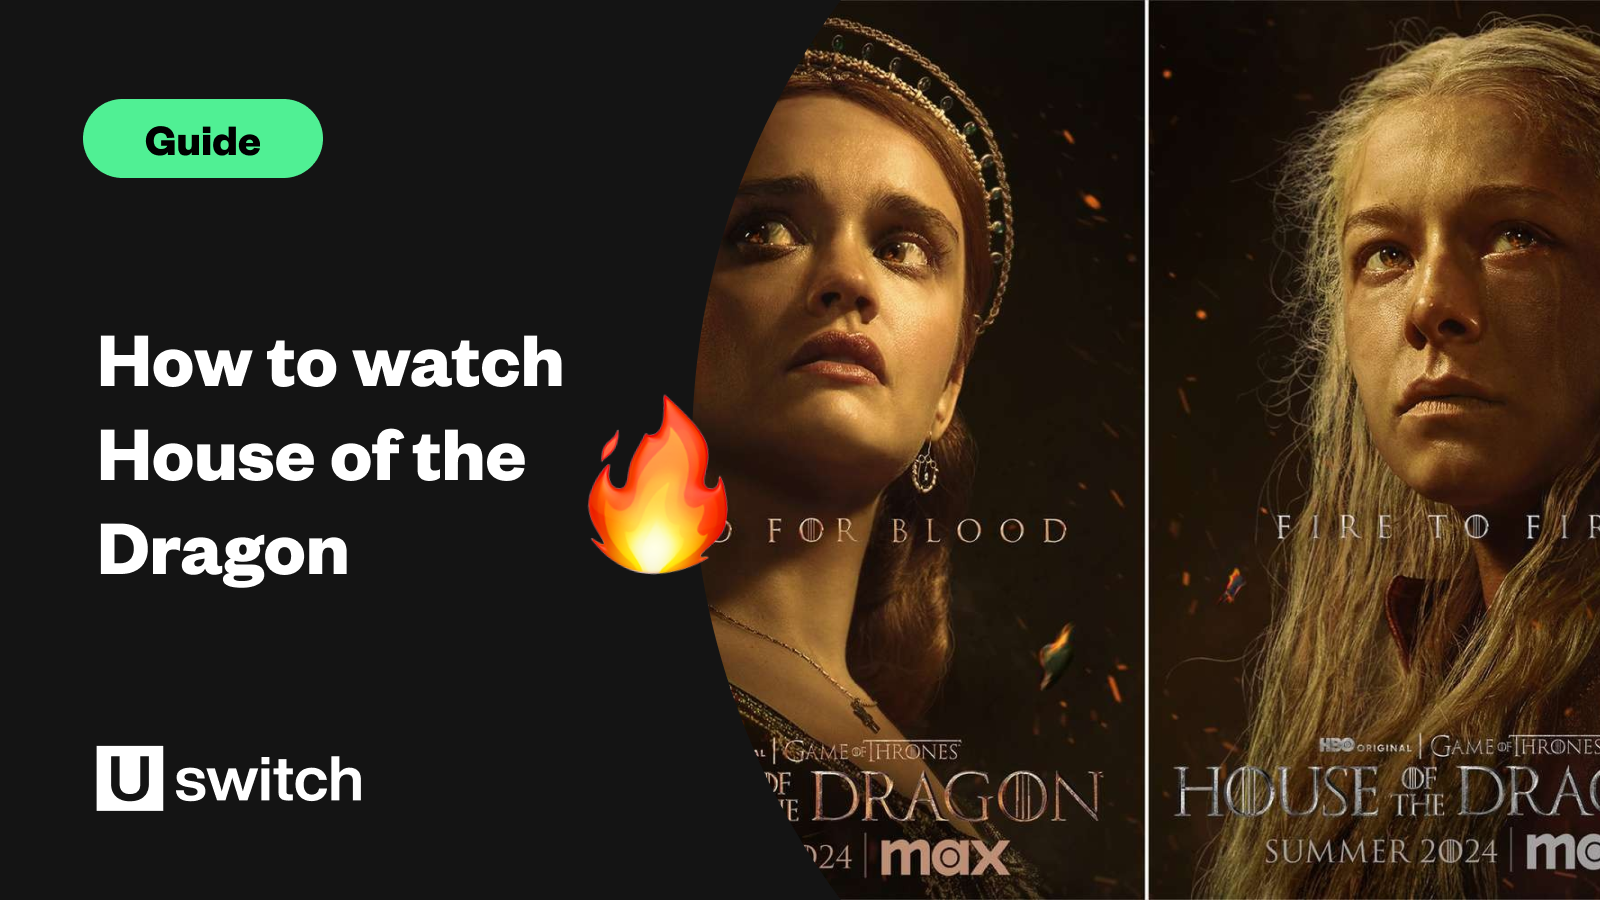 House of the Dragon episode 2 streaming: How to watch online